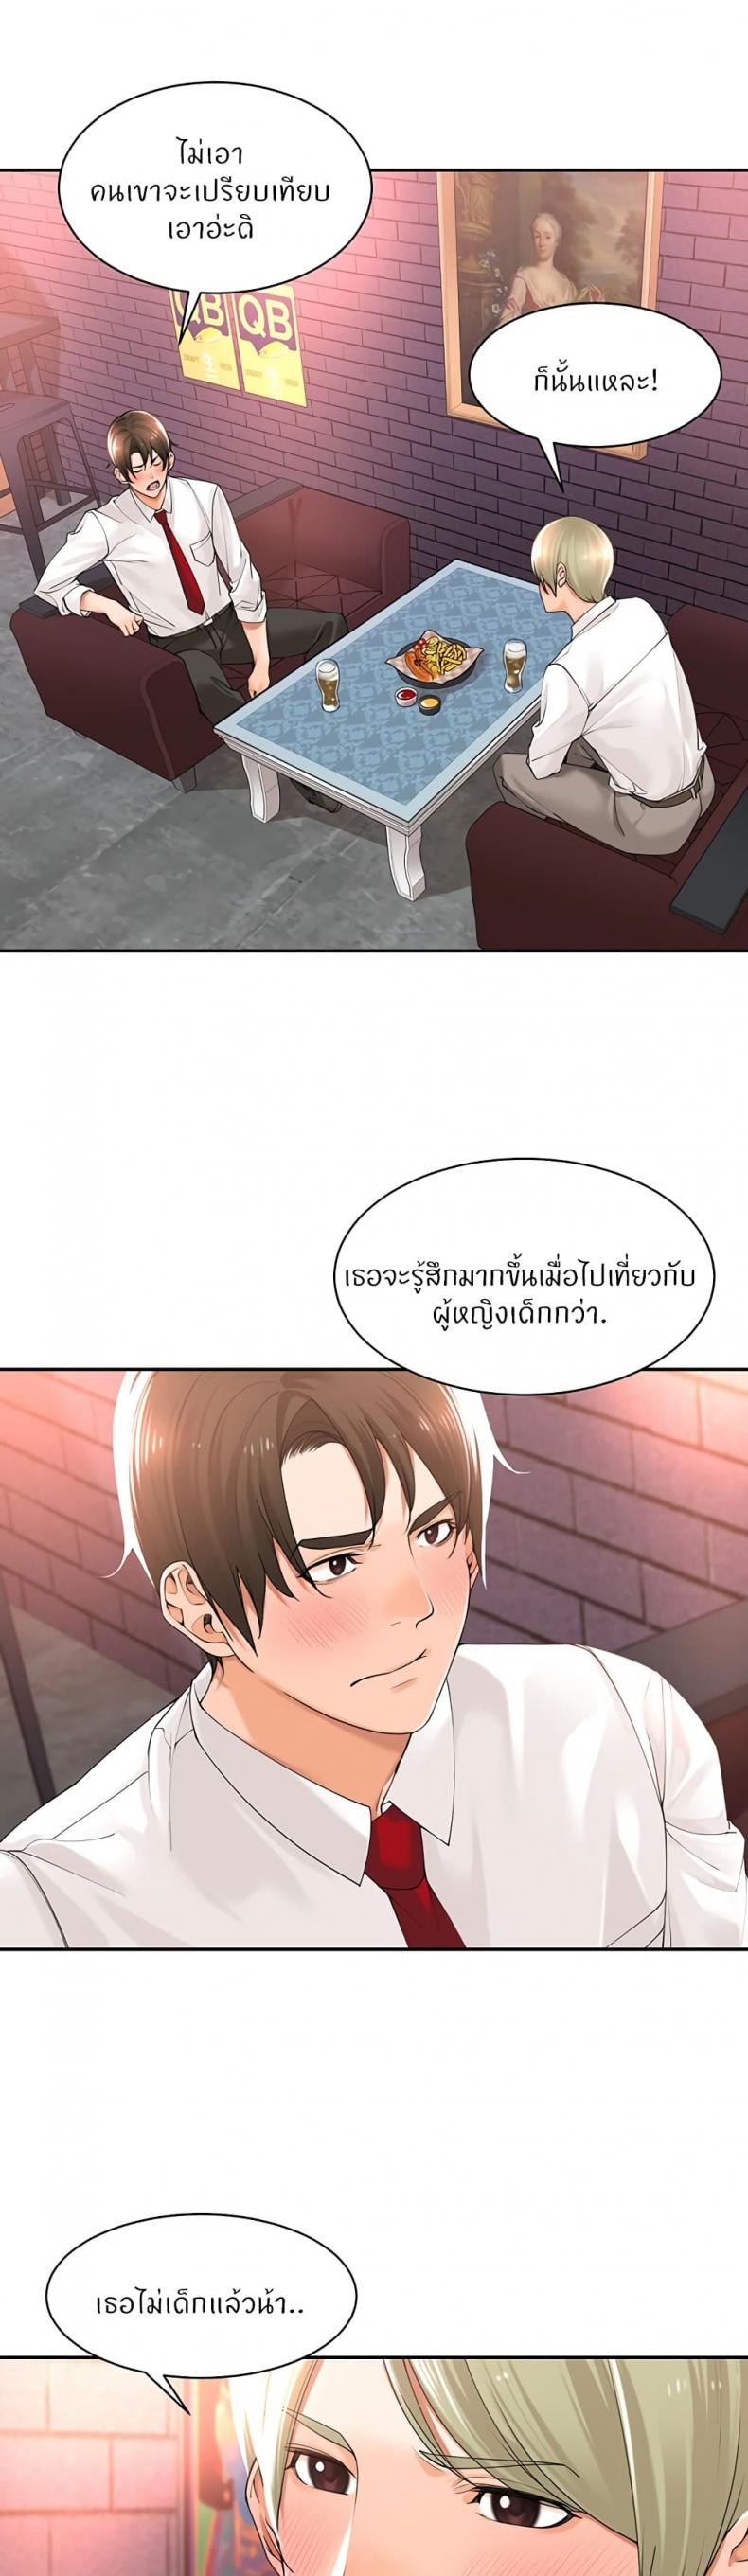 Manager, Please Scold Me 17 ภาพที่ 16